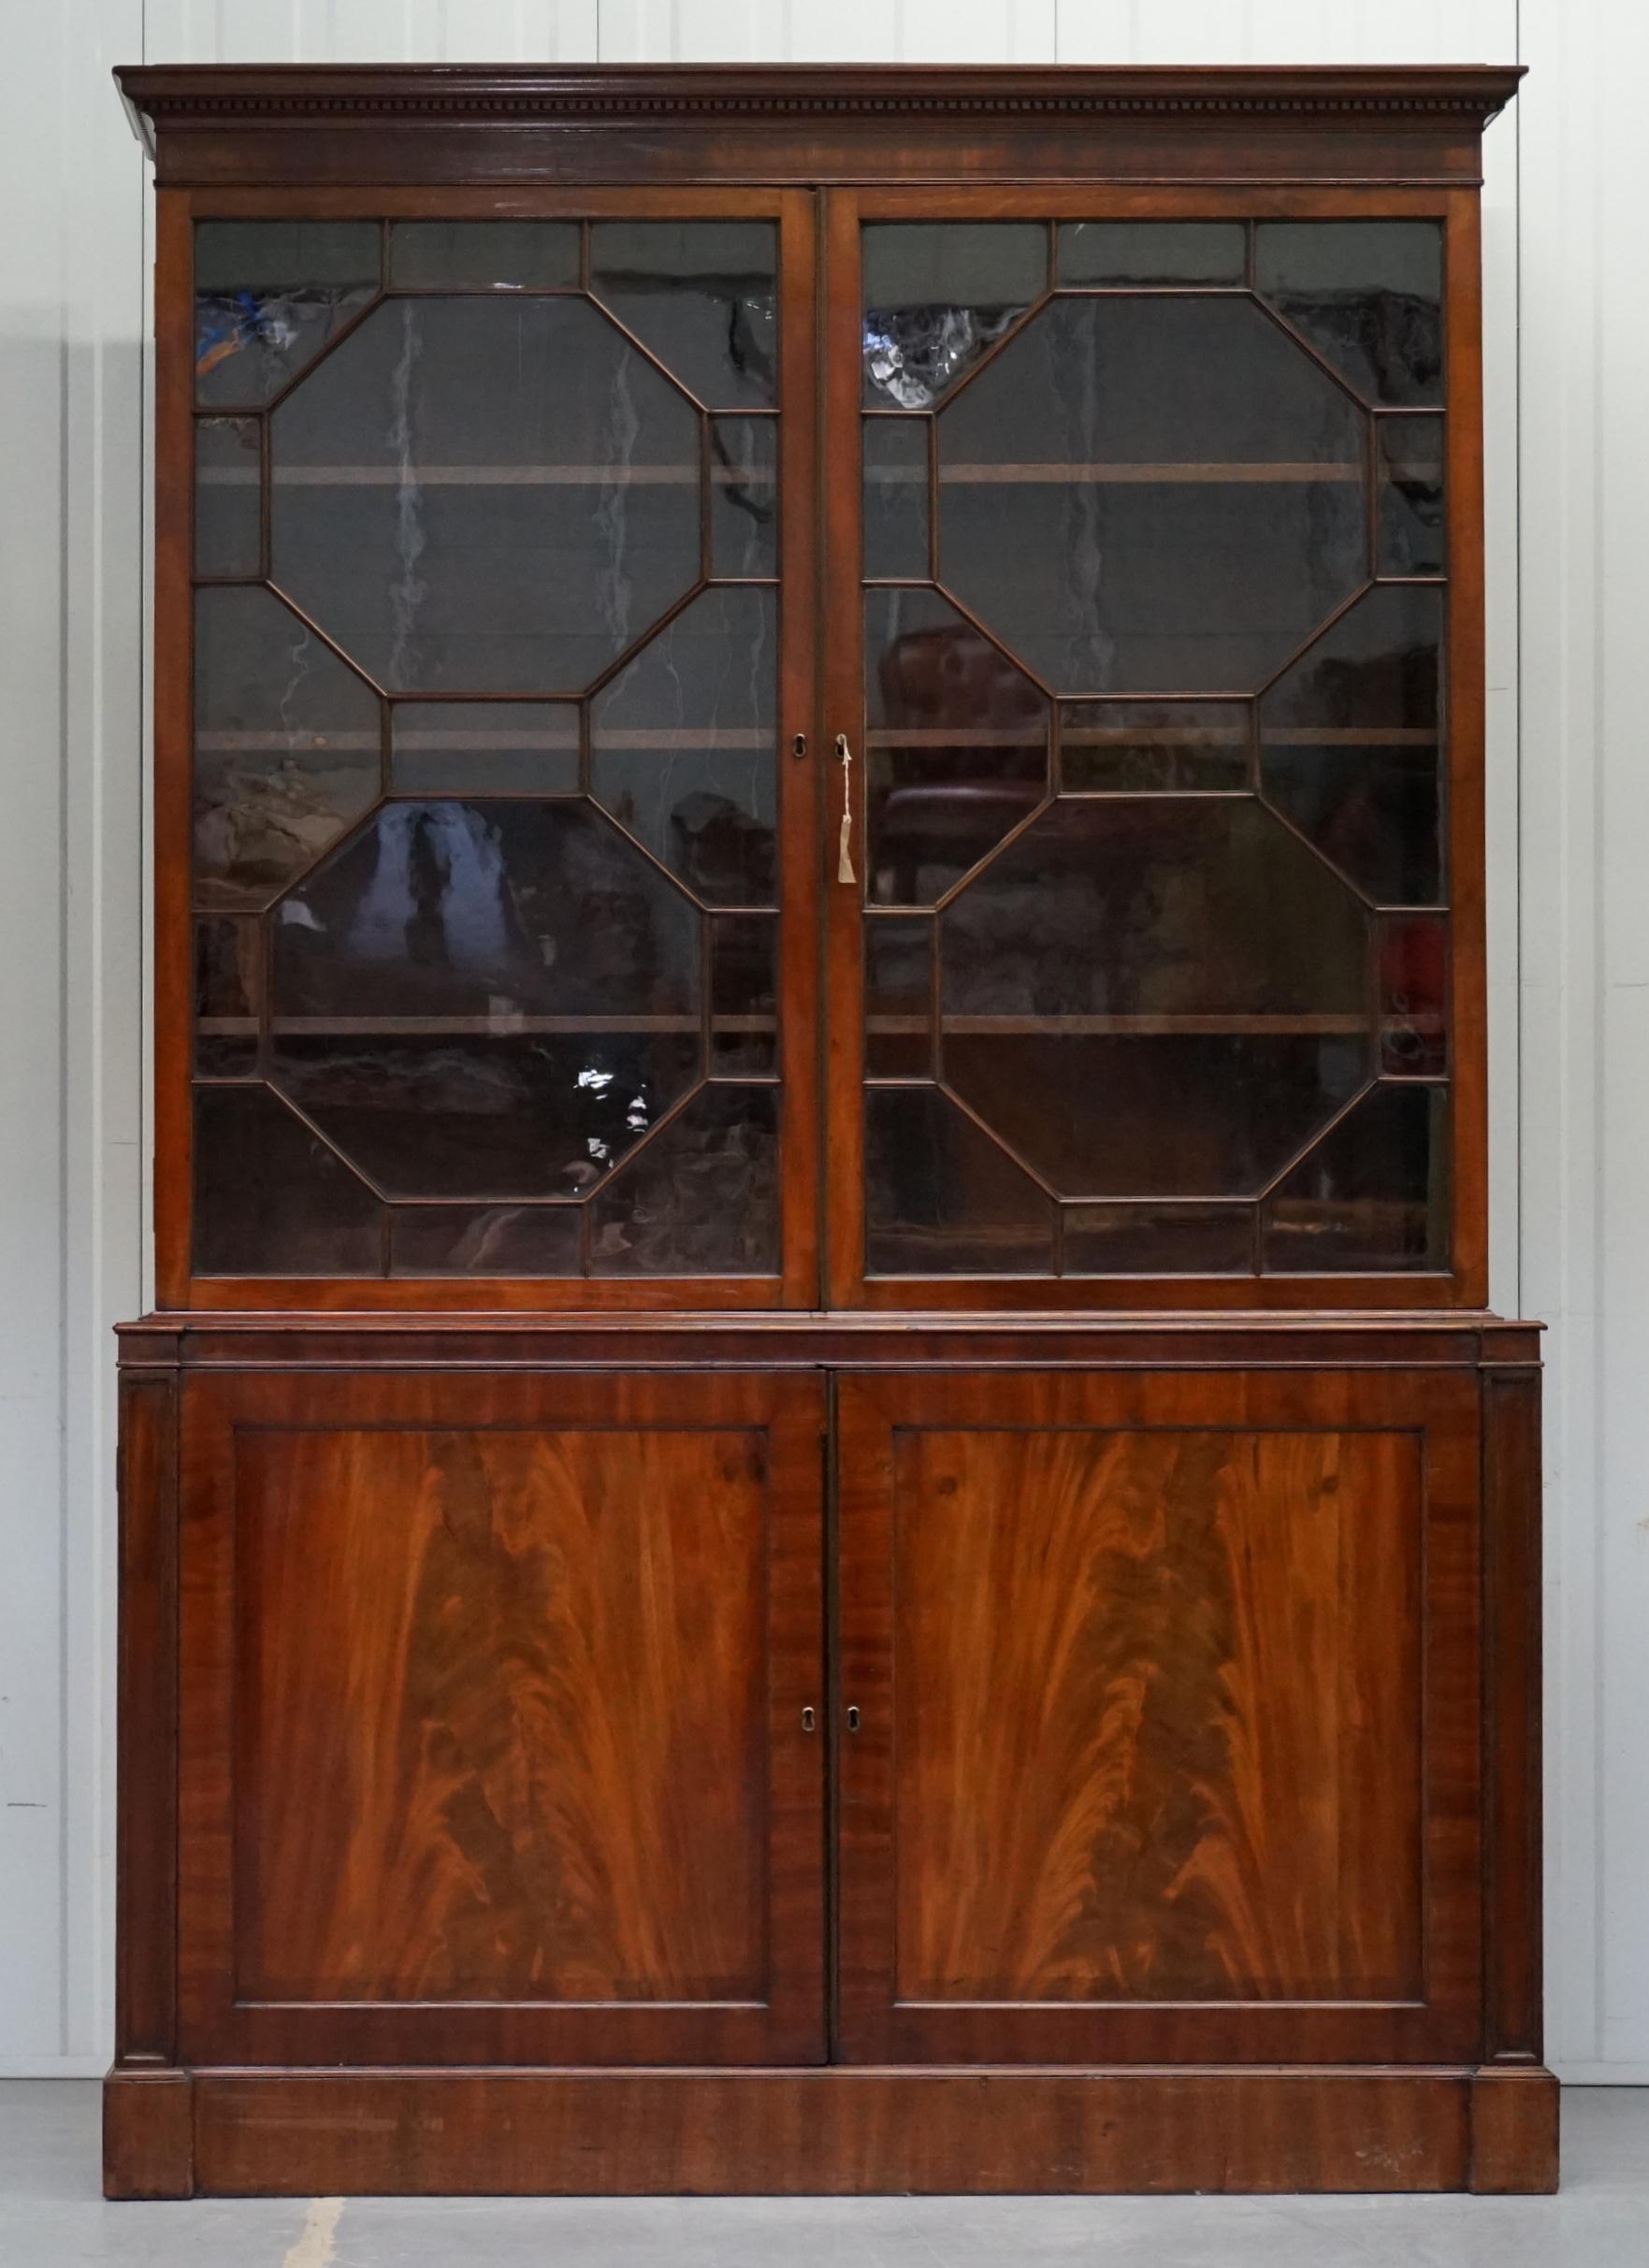 We are delighted to offer for sale this stunning original 1920s Astral glazed flamed mahogany bookcase with original paper labels for Waring & Gillows 180 Oxford street London

An exceptional quality bookcase, made by one of the greatest furniture